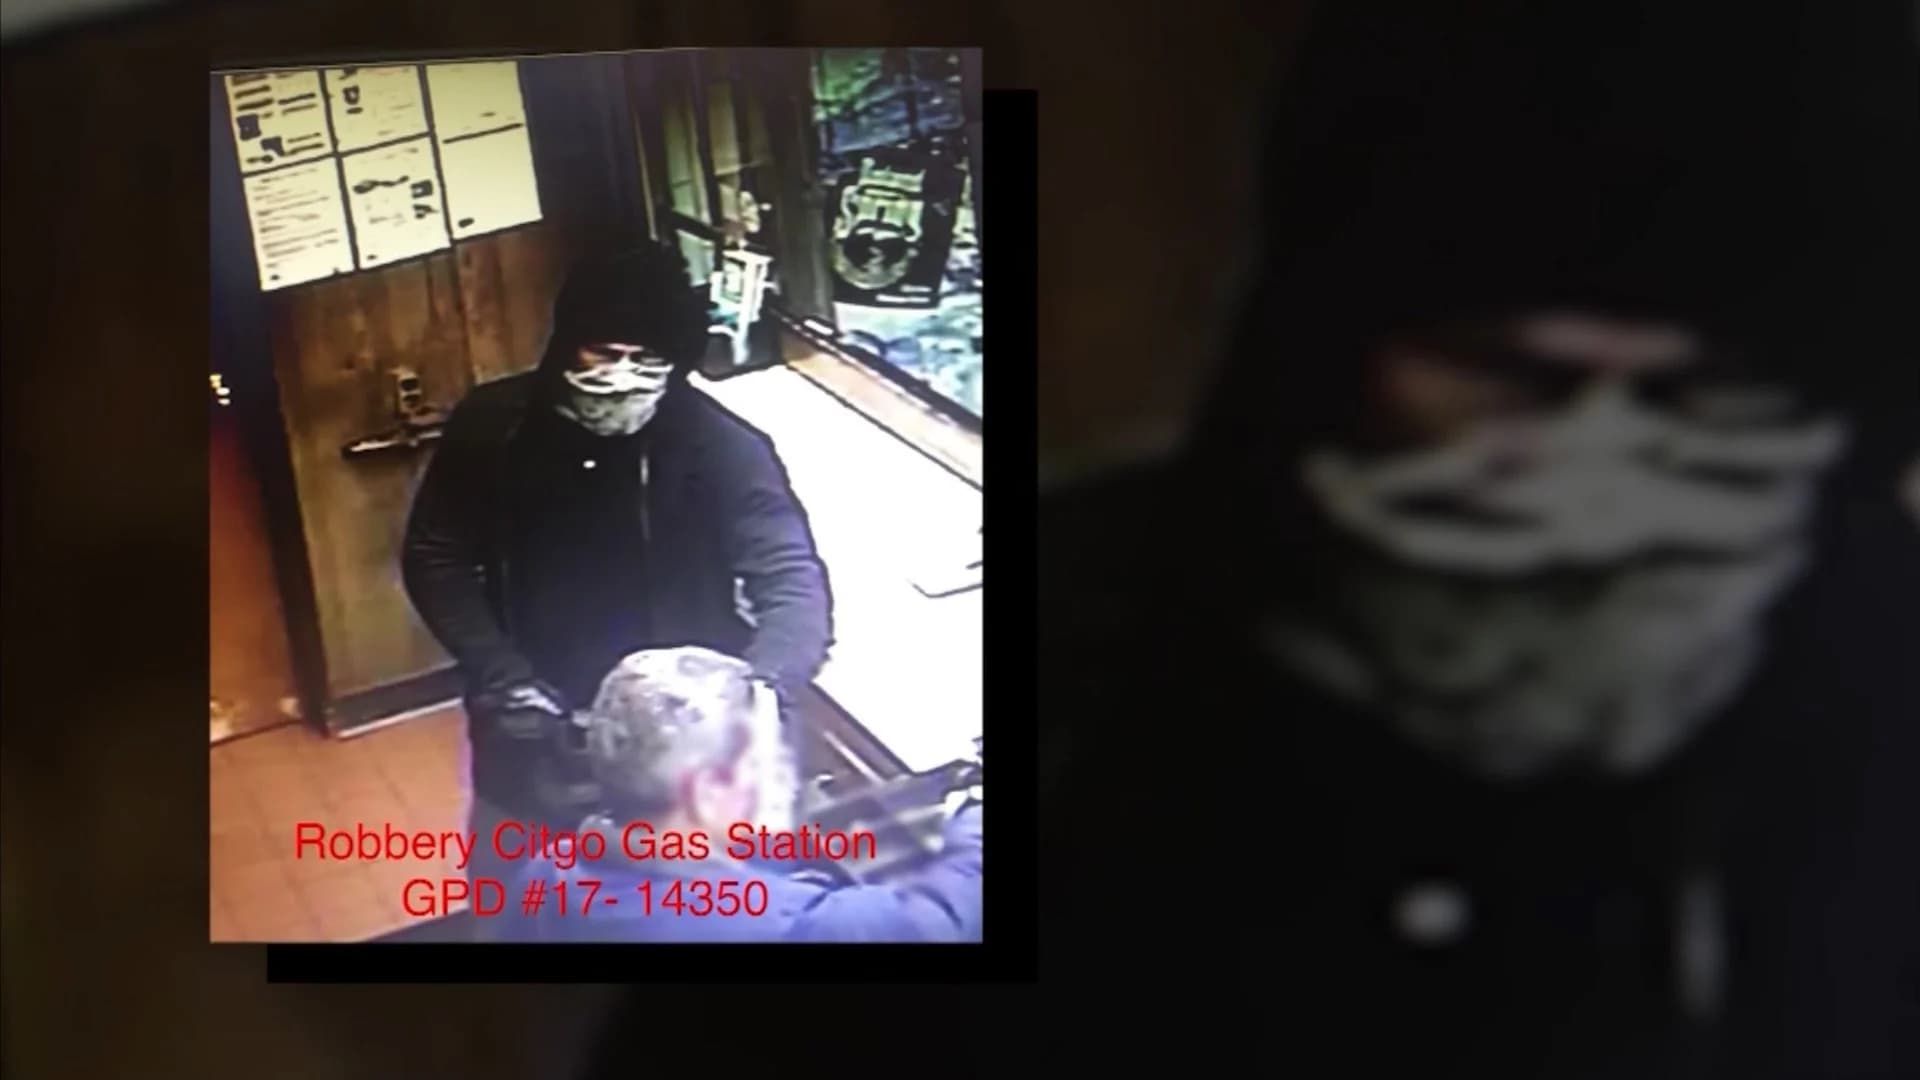 Police still search for man suspected of robbing two Greenwich businesses in span of 12 hours